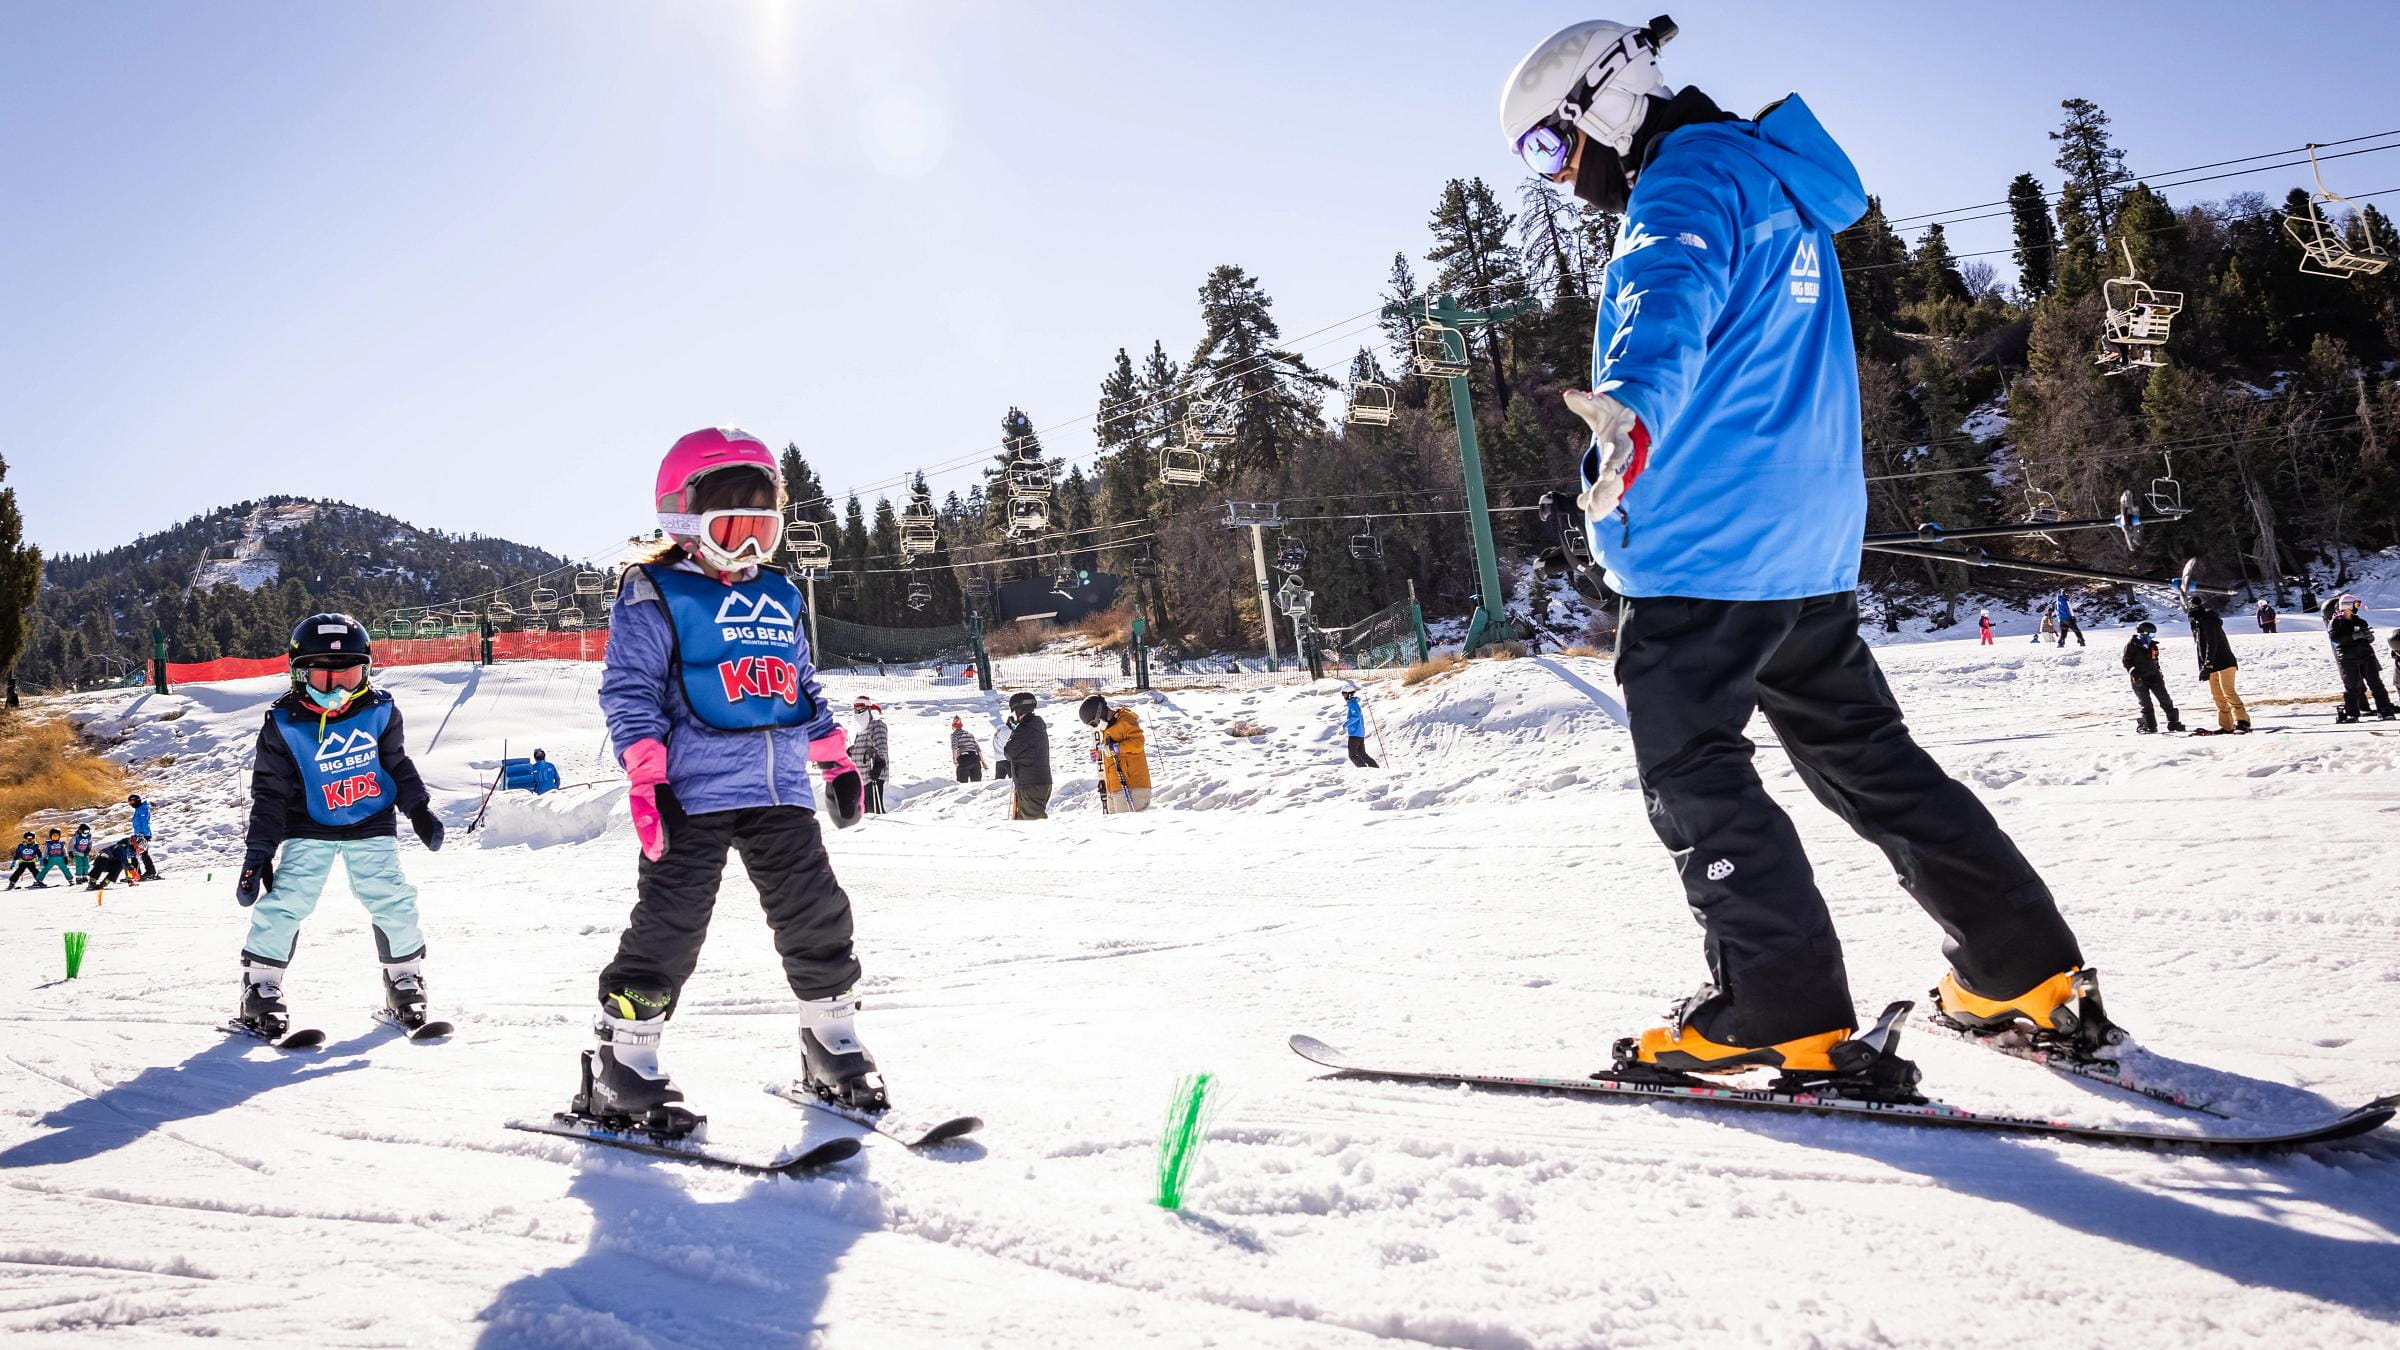 Two young kids taking a ski lesson.